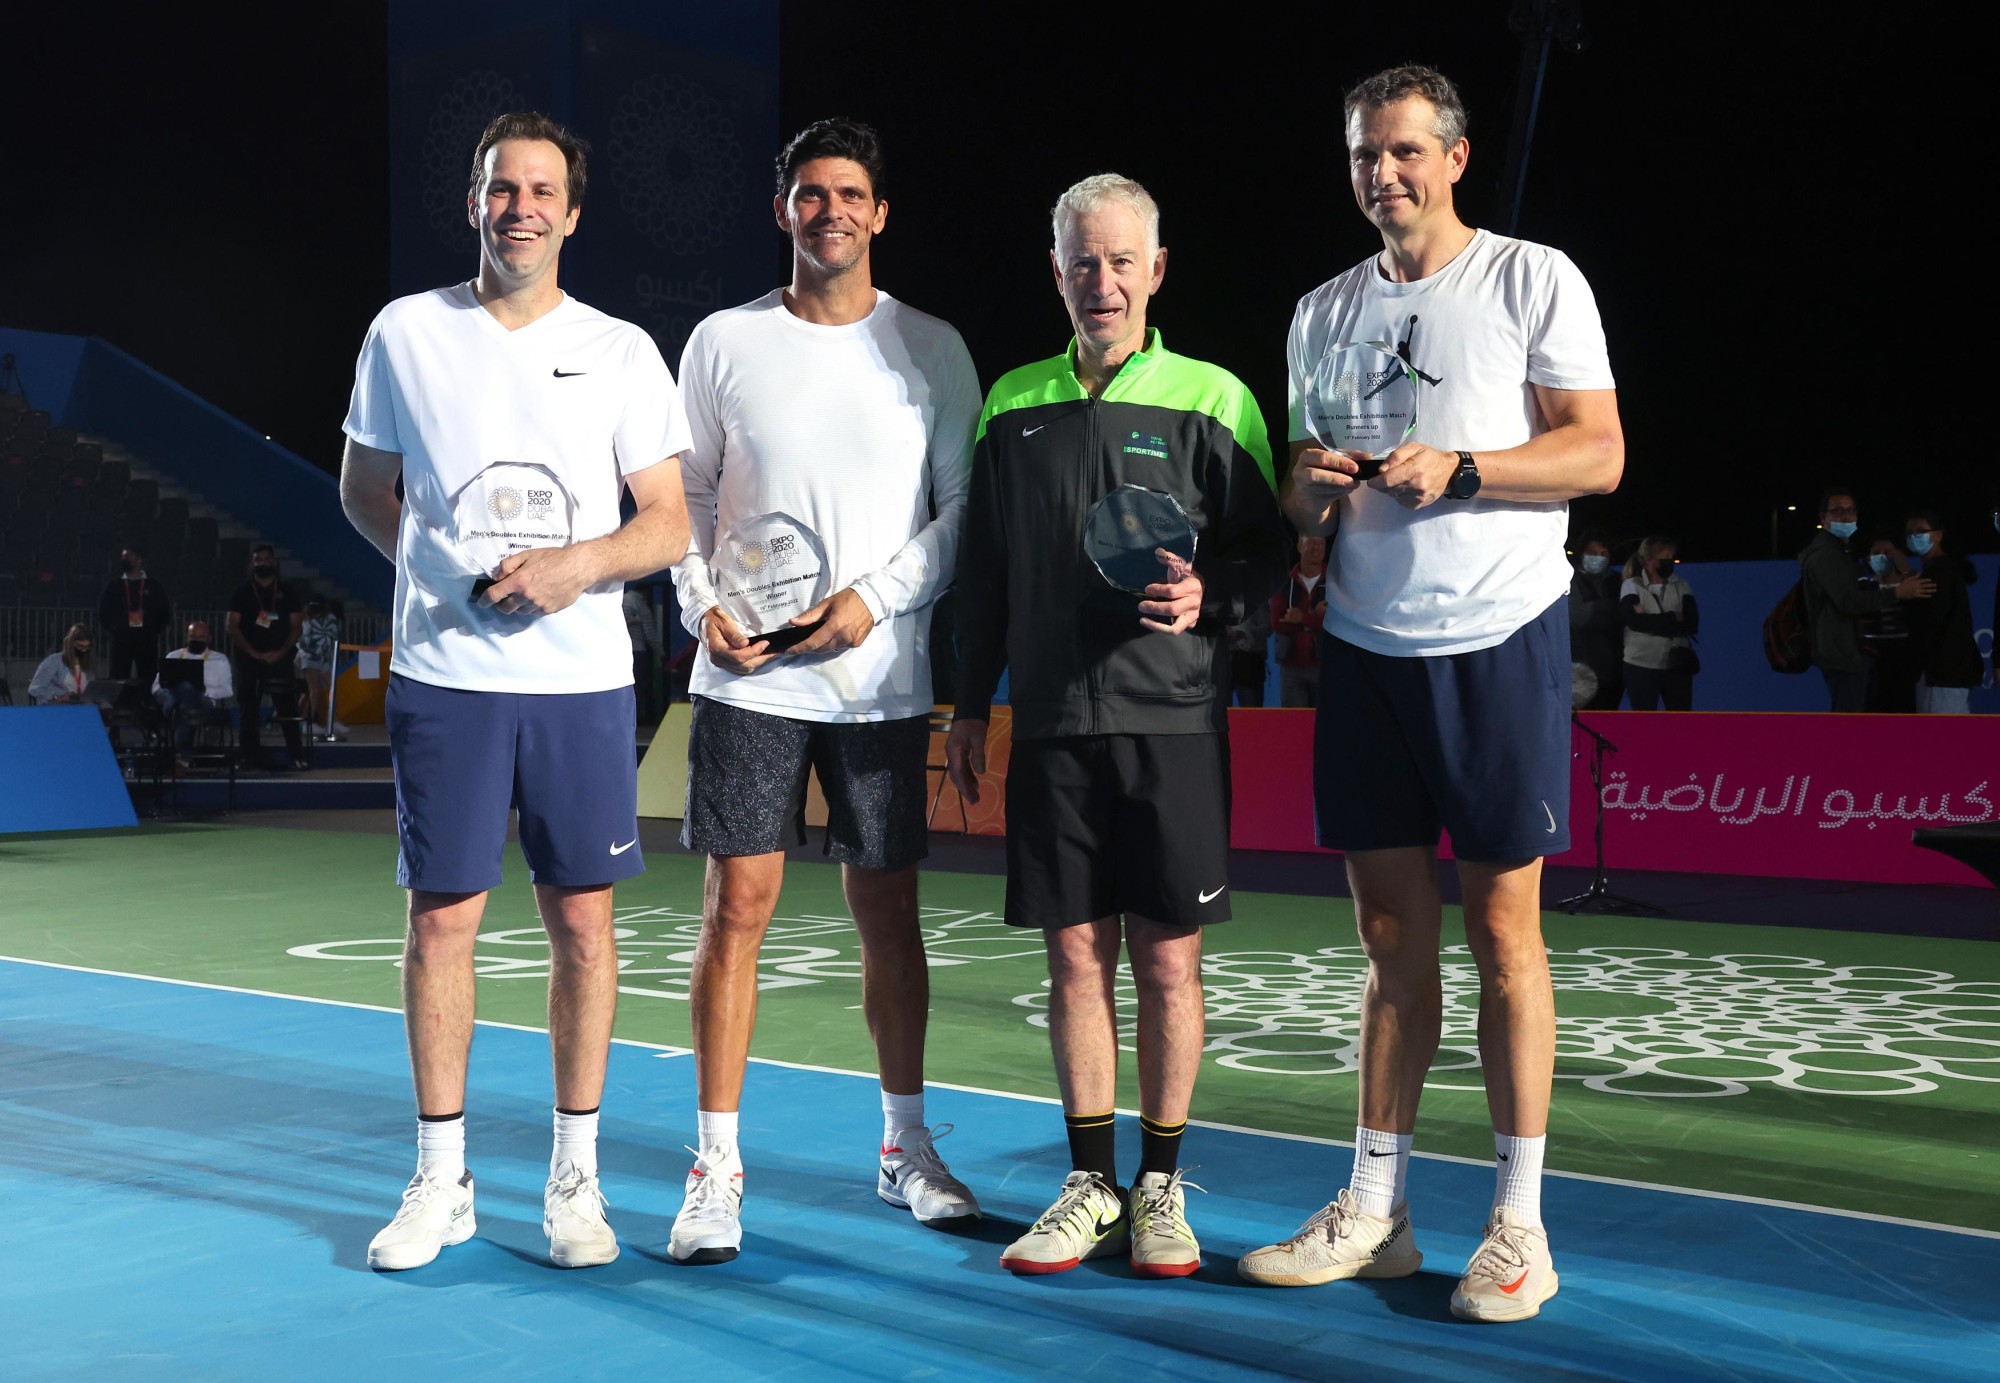 Men’s Doubles Exhibition Game winners and tennis legends Mark Philippoussis (L2) and Greg Rusedski (L1) alongside runners up John McEnroe (R2) and Richard Krajicek (R1) with their awards during Expo 2020 Dubai Tennis Week at the Expo Sport